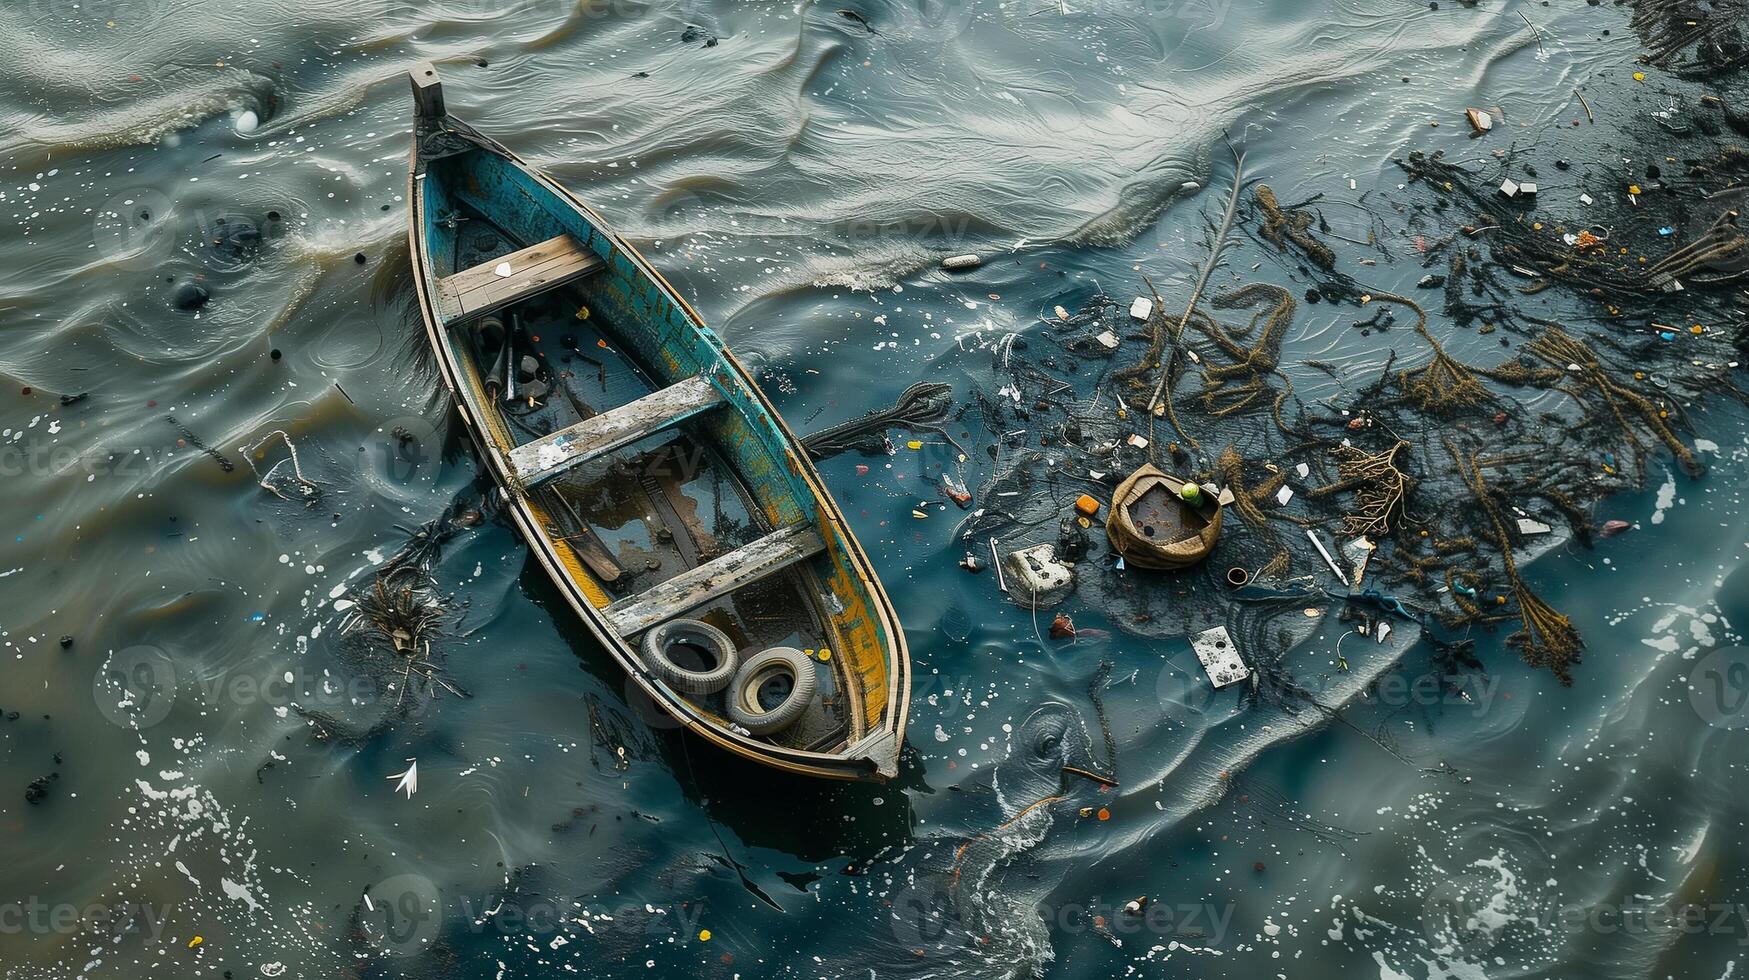 A solitary wooden boat floats in polluted waters, surrounded by debris and waste, highlighting environmental concerns. photo